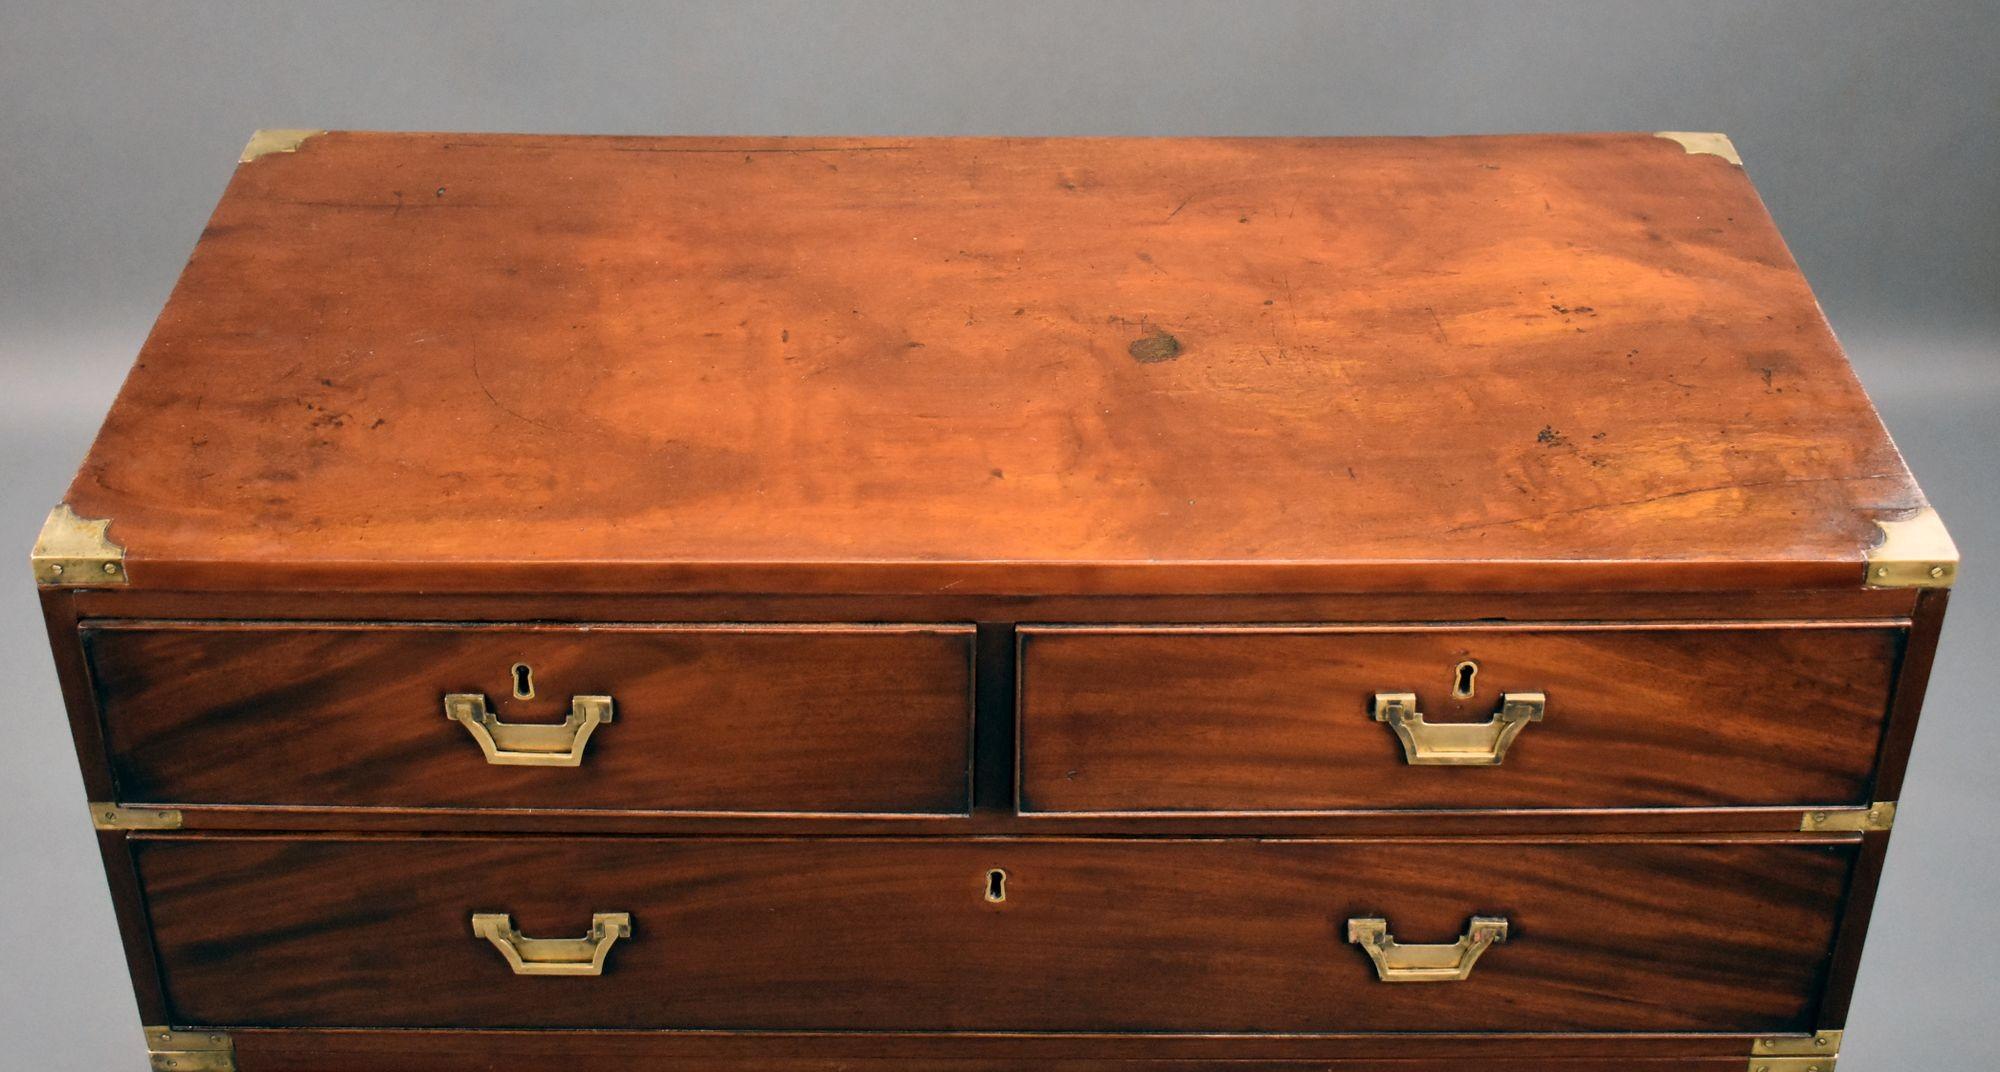 For sale is a good quality 19th century mahogany campaign style chest, having three drawers in the top (two short over one long) with a further two long drawers in the base, each with brass military handles. Both the top and bottom of the chest have